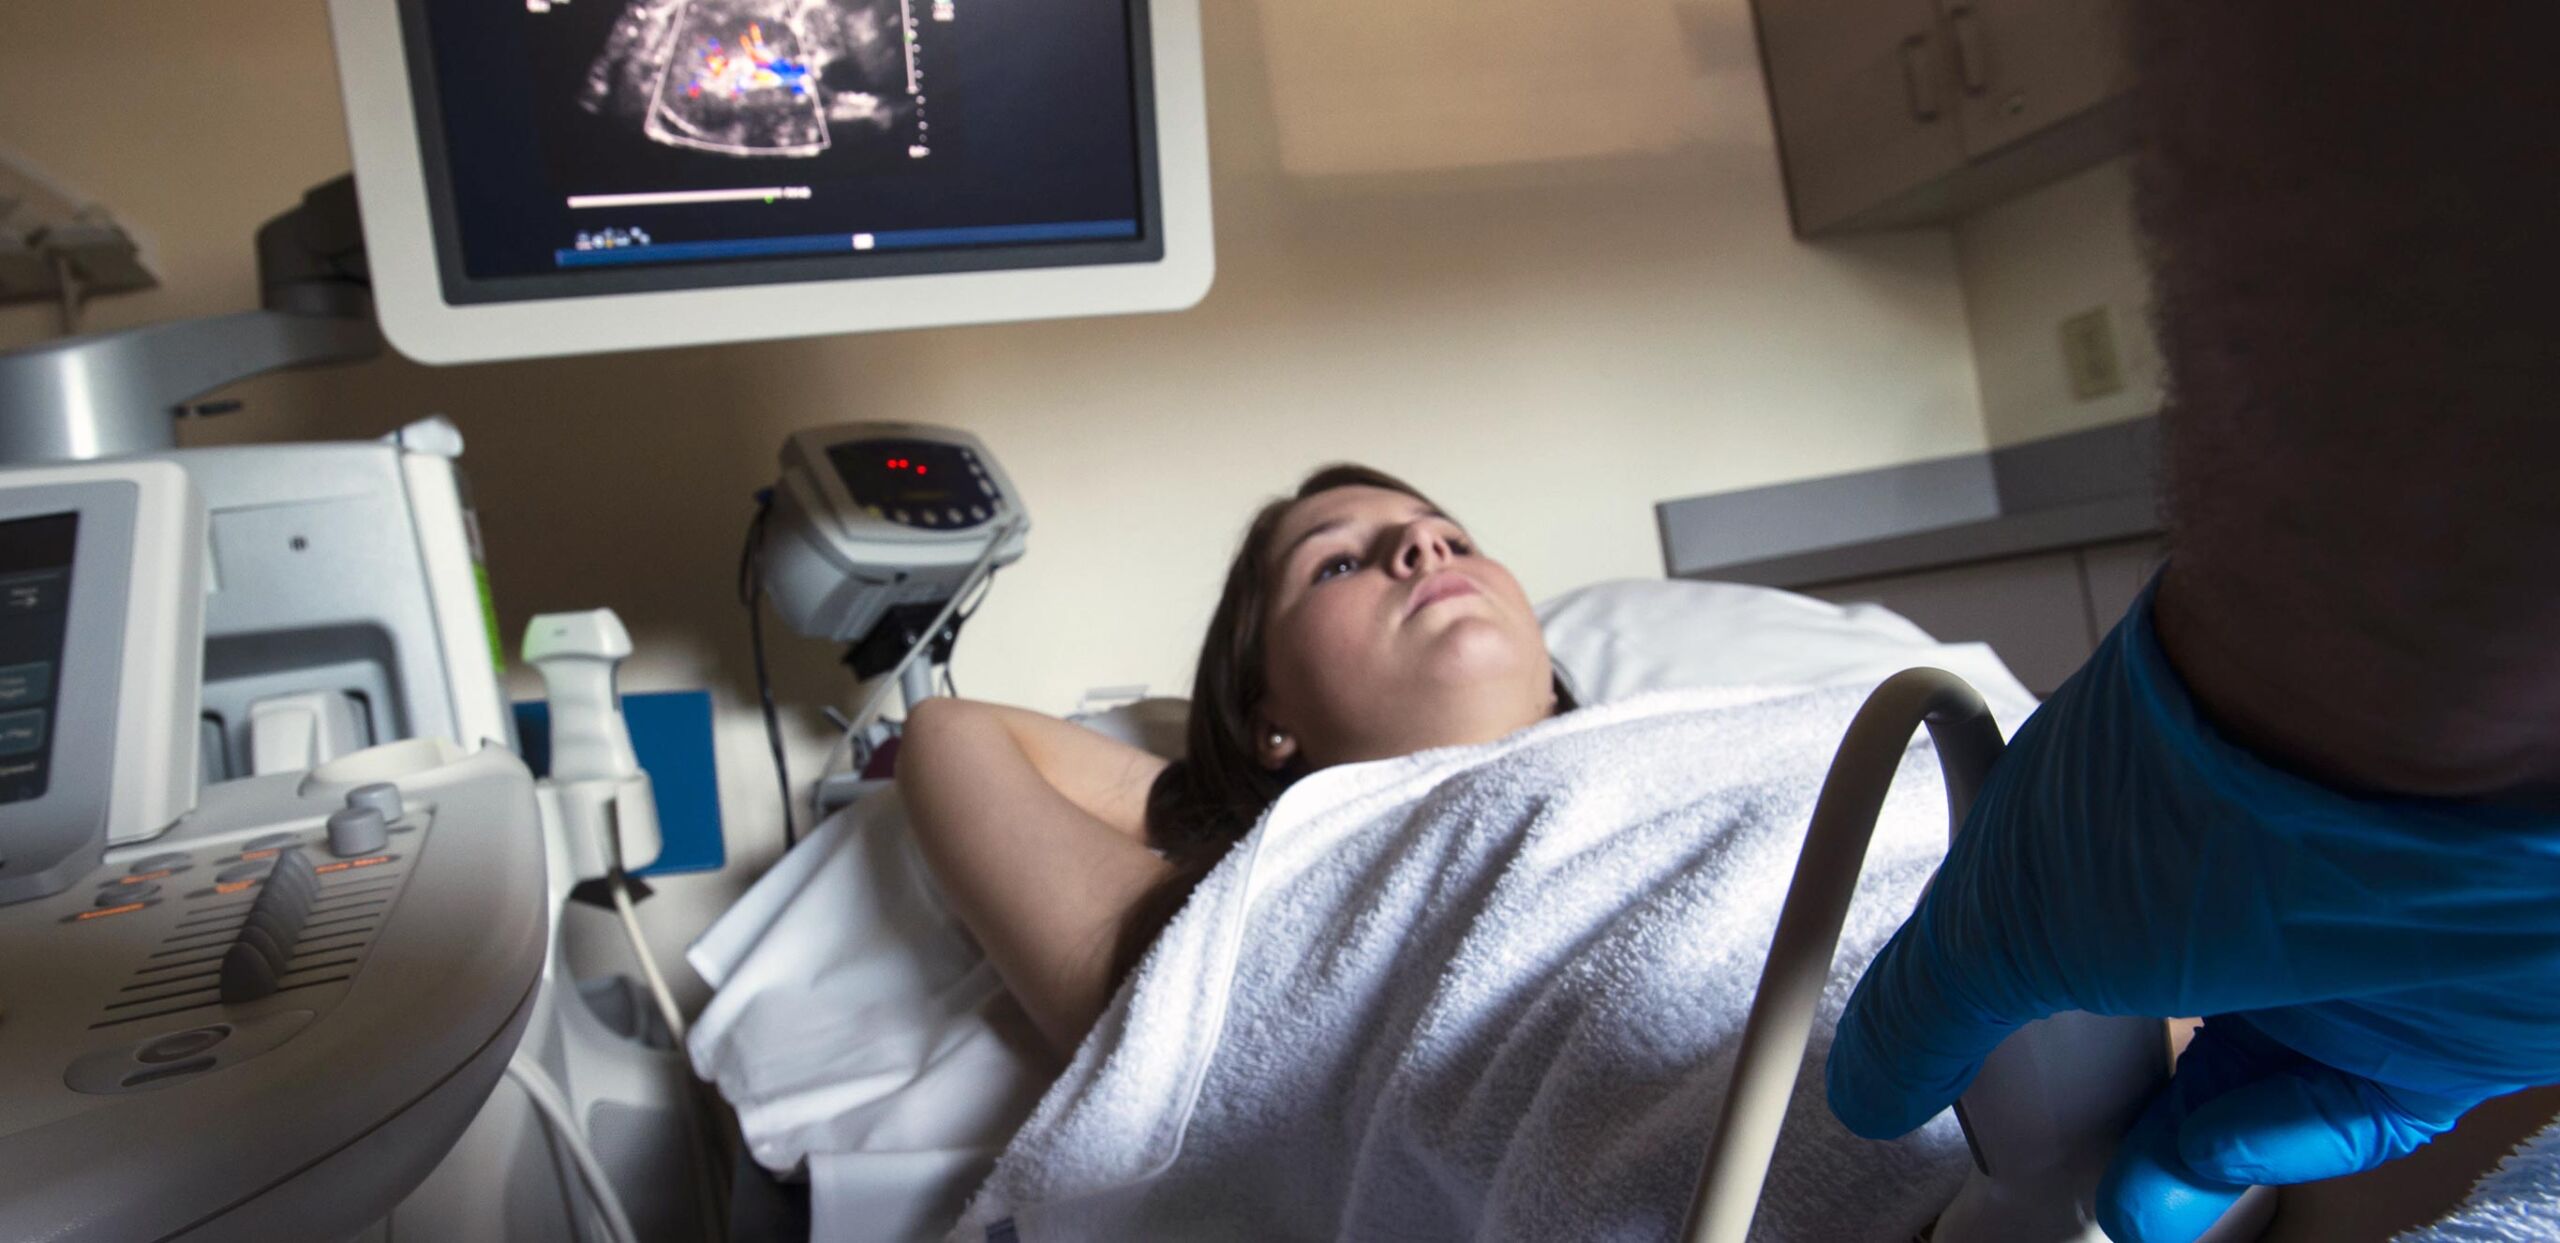 Technologist monitors display while performing ultrasound scan of female patient's torso at Cooley Dickinson Hospital, 30 Locust Street, Northampton, MA 01060.